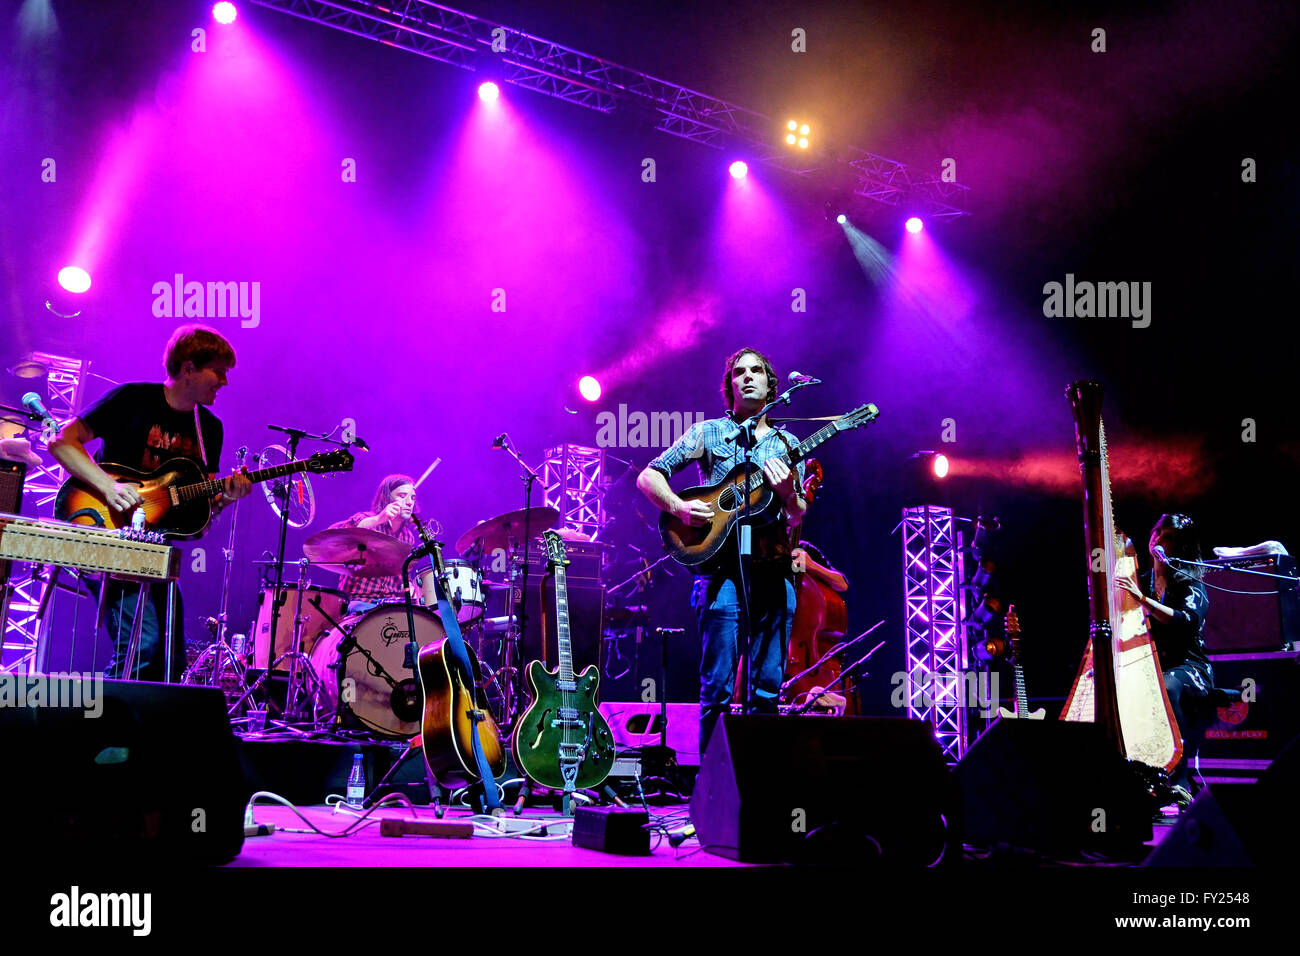 BILBAO, SPAIN - OCT 31: The Barr Brothers (band) live performance at Bime Festival on October 31, 2014 in Bilbao, Spain. Stock Photo